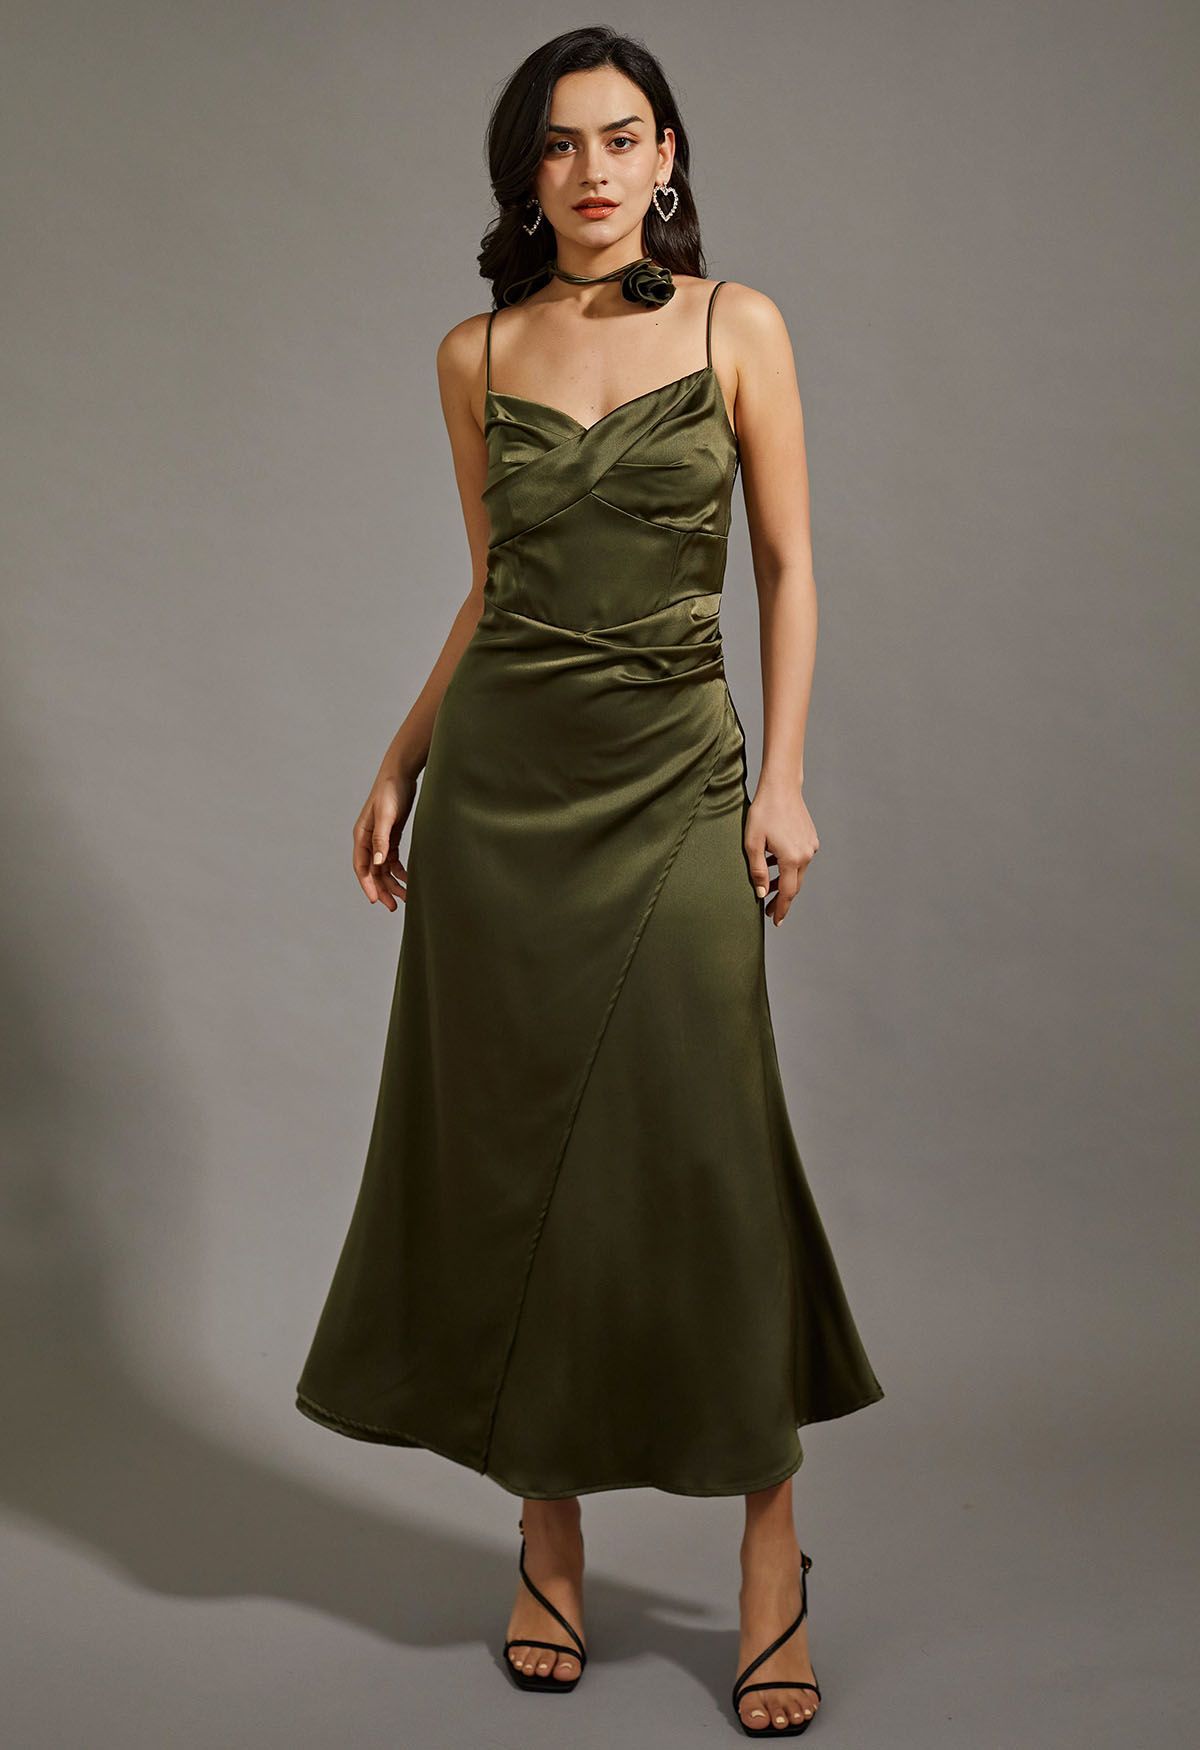 Floral Choker Satin Cami Maxi Dress in Olive | Chicwish